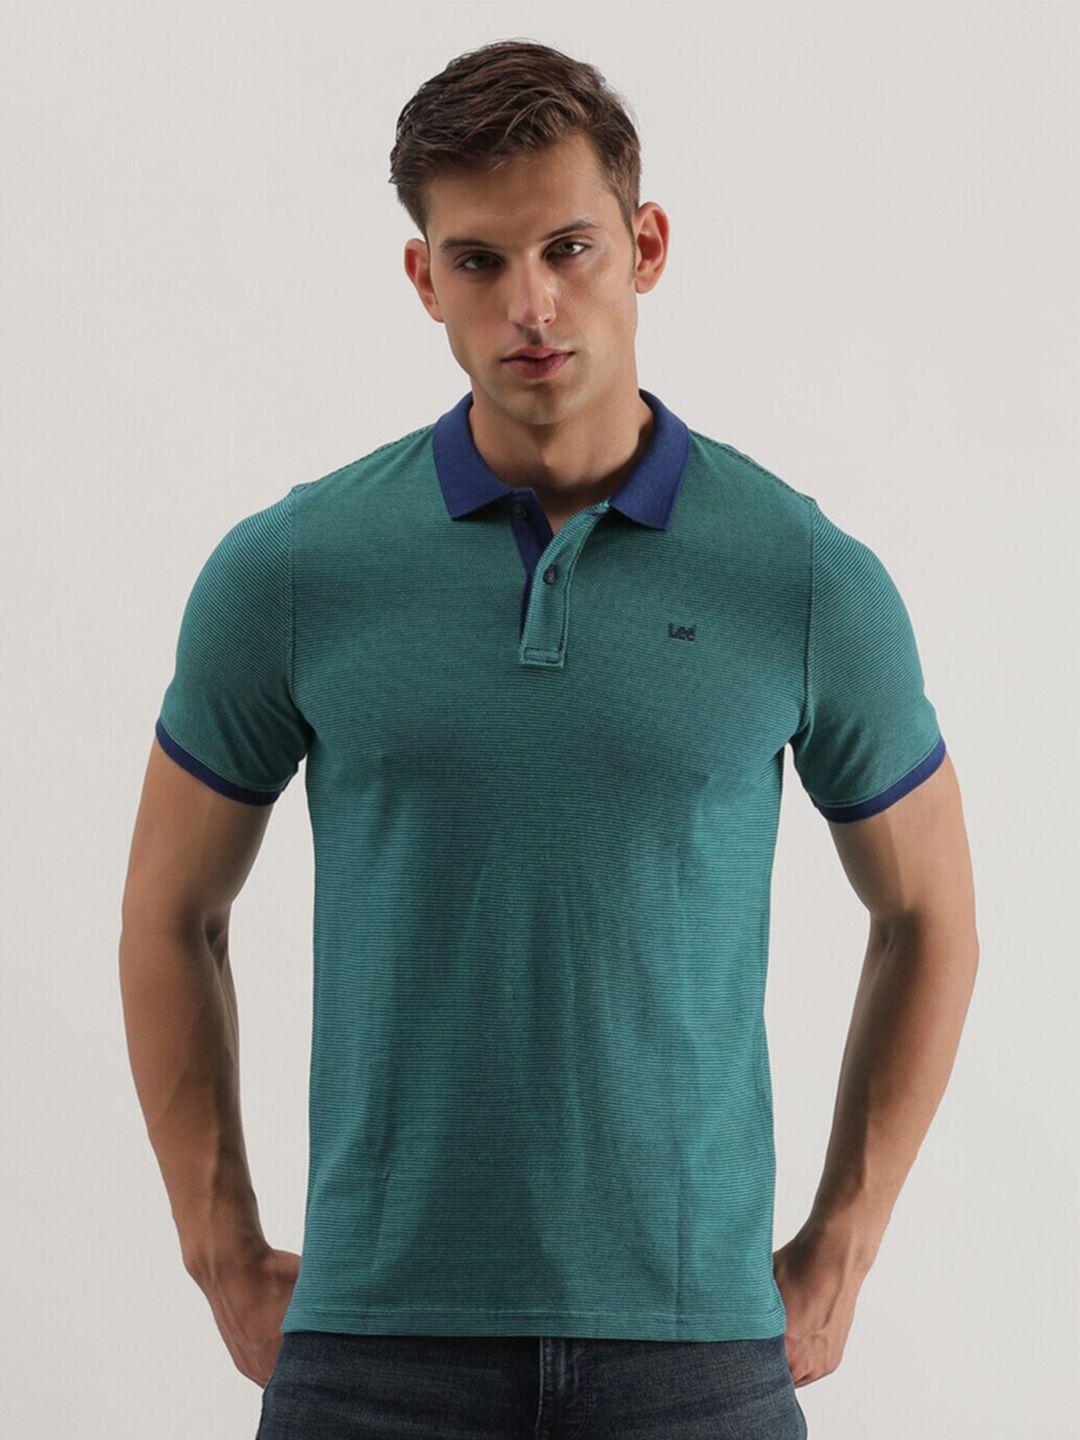 lee striped polo collar slim fit cotton t-shirt